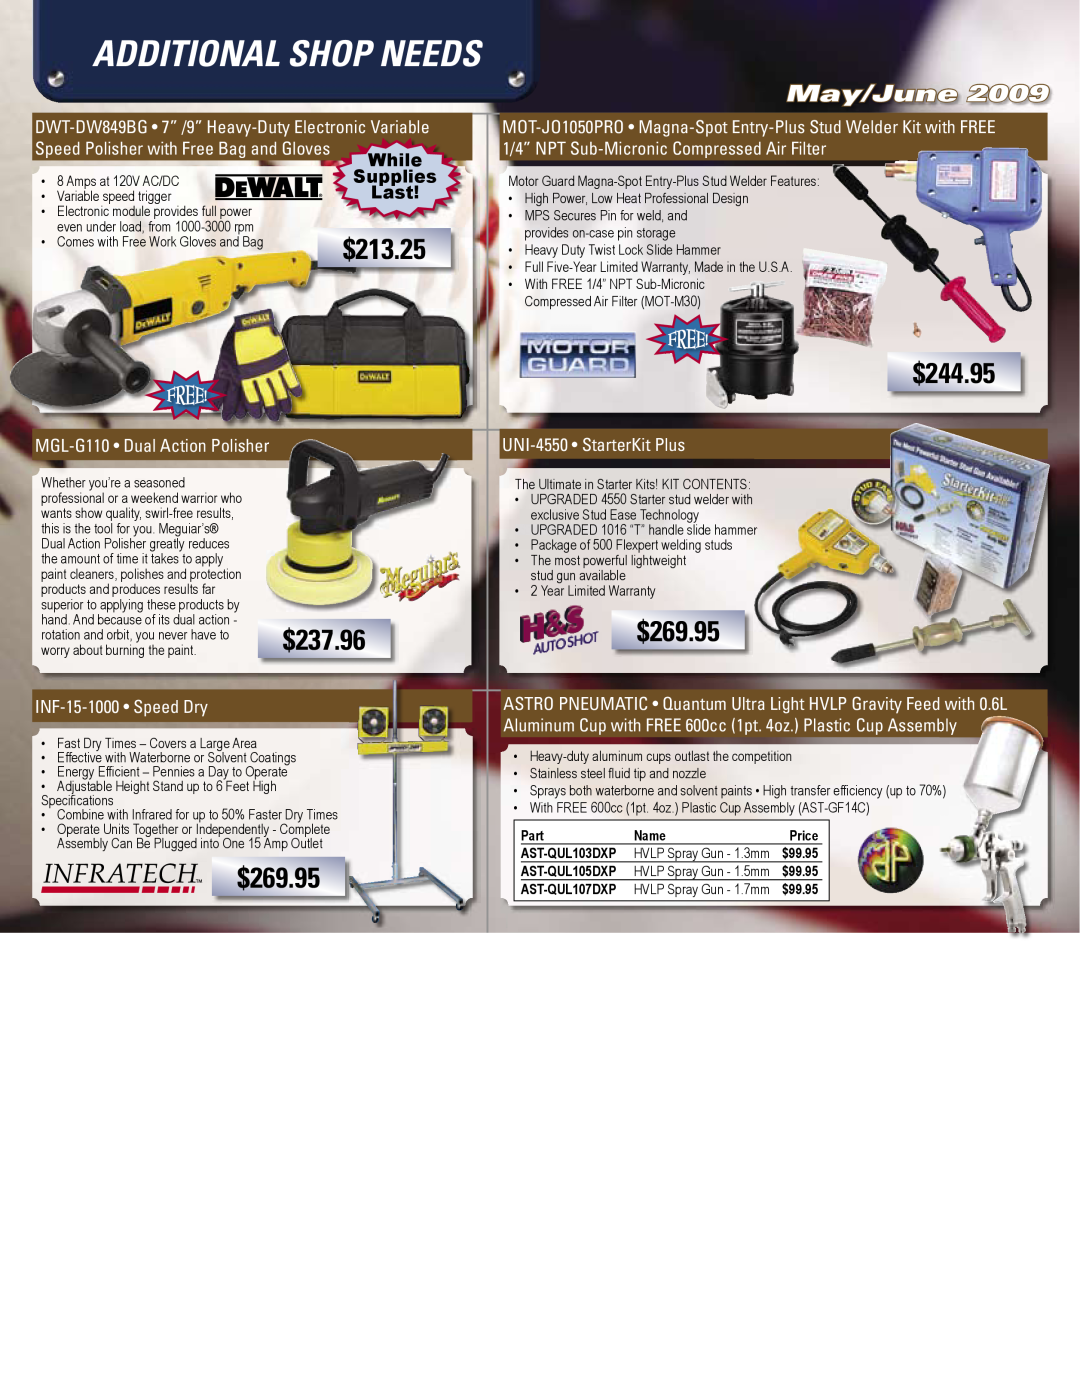 3M 7190 Additional Shop Needs, $244.95, $269.95, DWT-DW849BG 7” /9” Heavy-Duty Electronic Variable, INF-15-1000 Speed Dry 